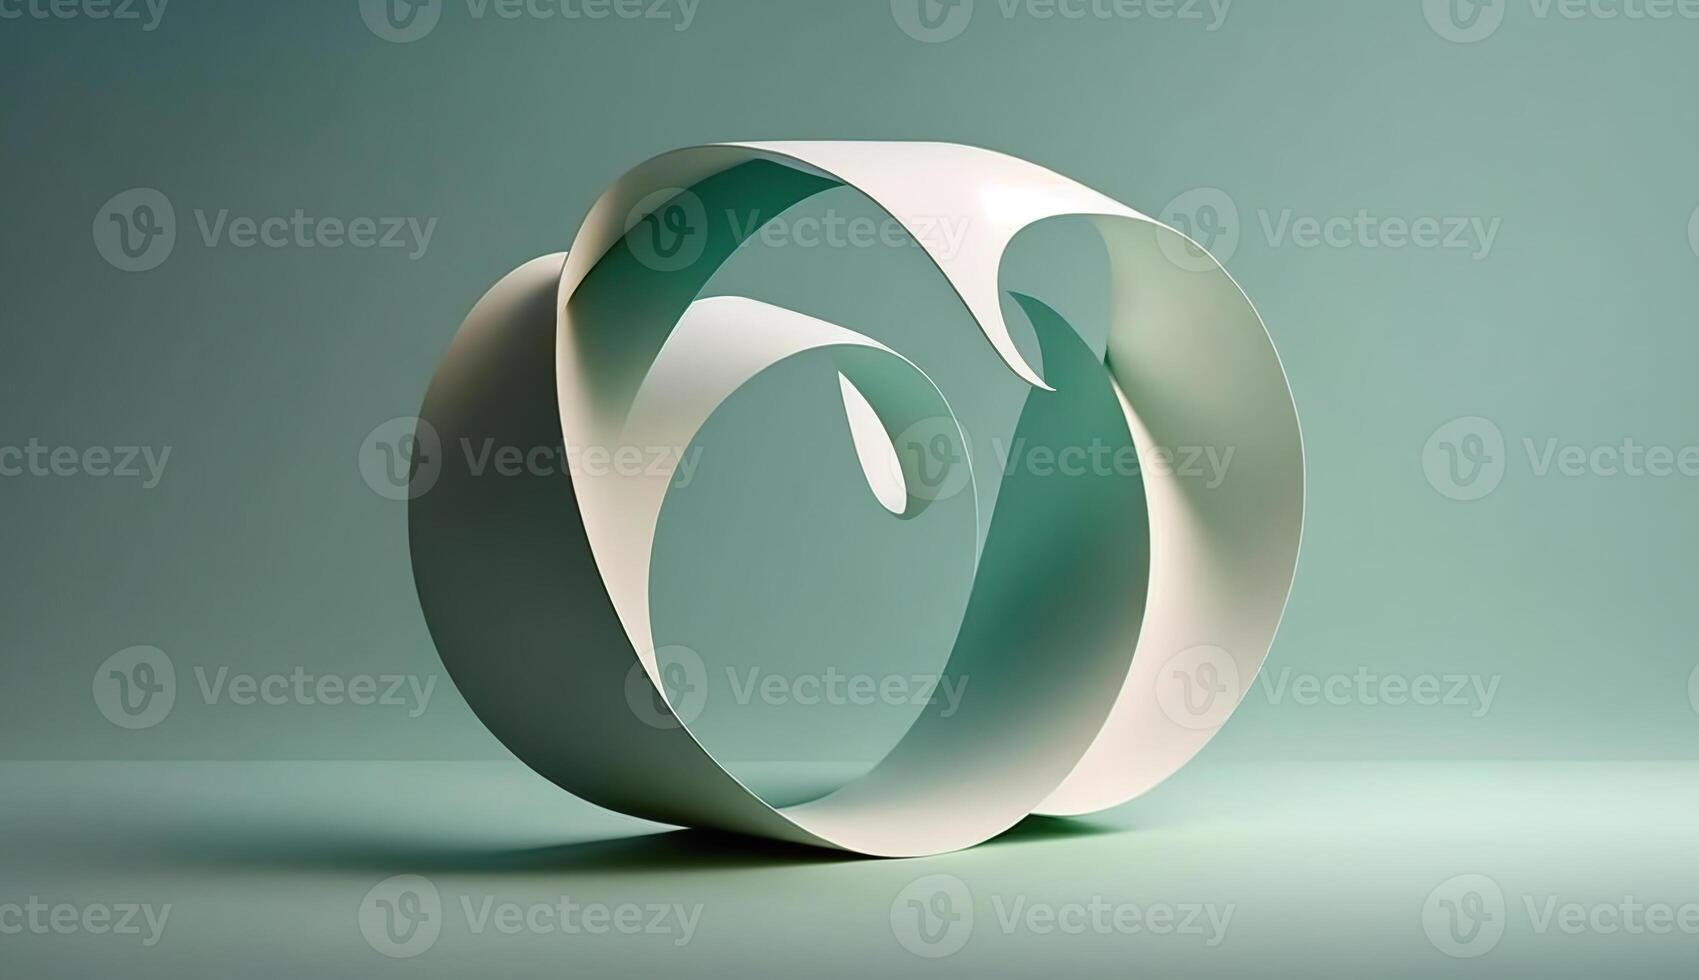 Mobius strip made from paper soaring in the air on mint background. Trendy surreal airy image. Abstract year color concept composition, photo